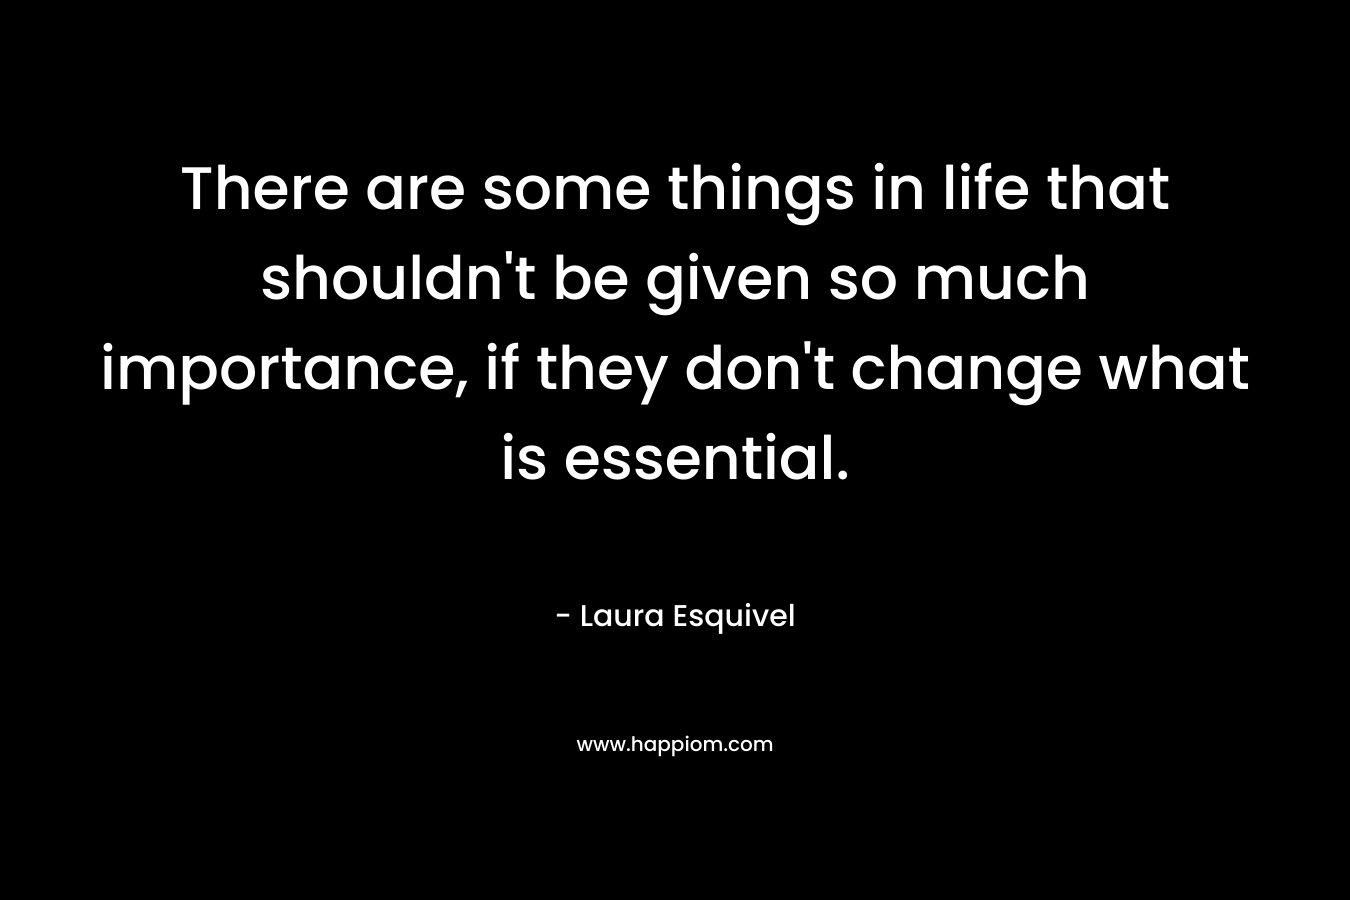 There are some things in life that shouldn't be given so much importance, if they don't change what is essential.